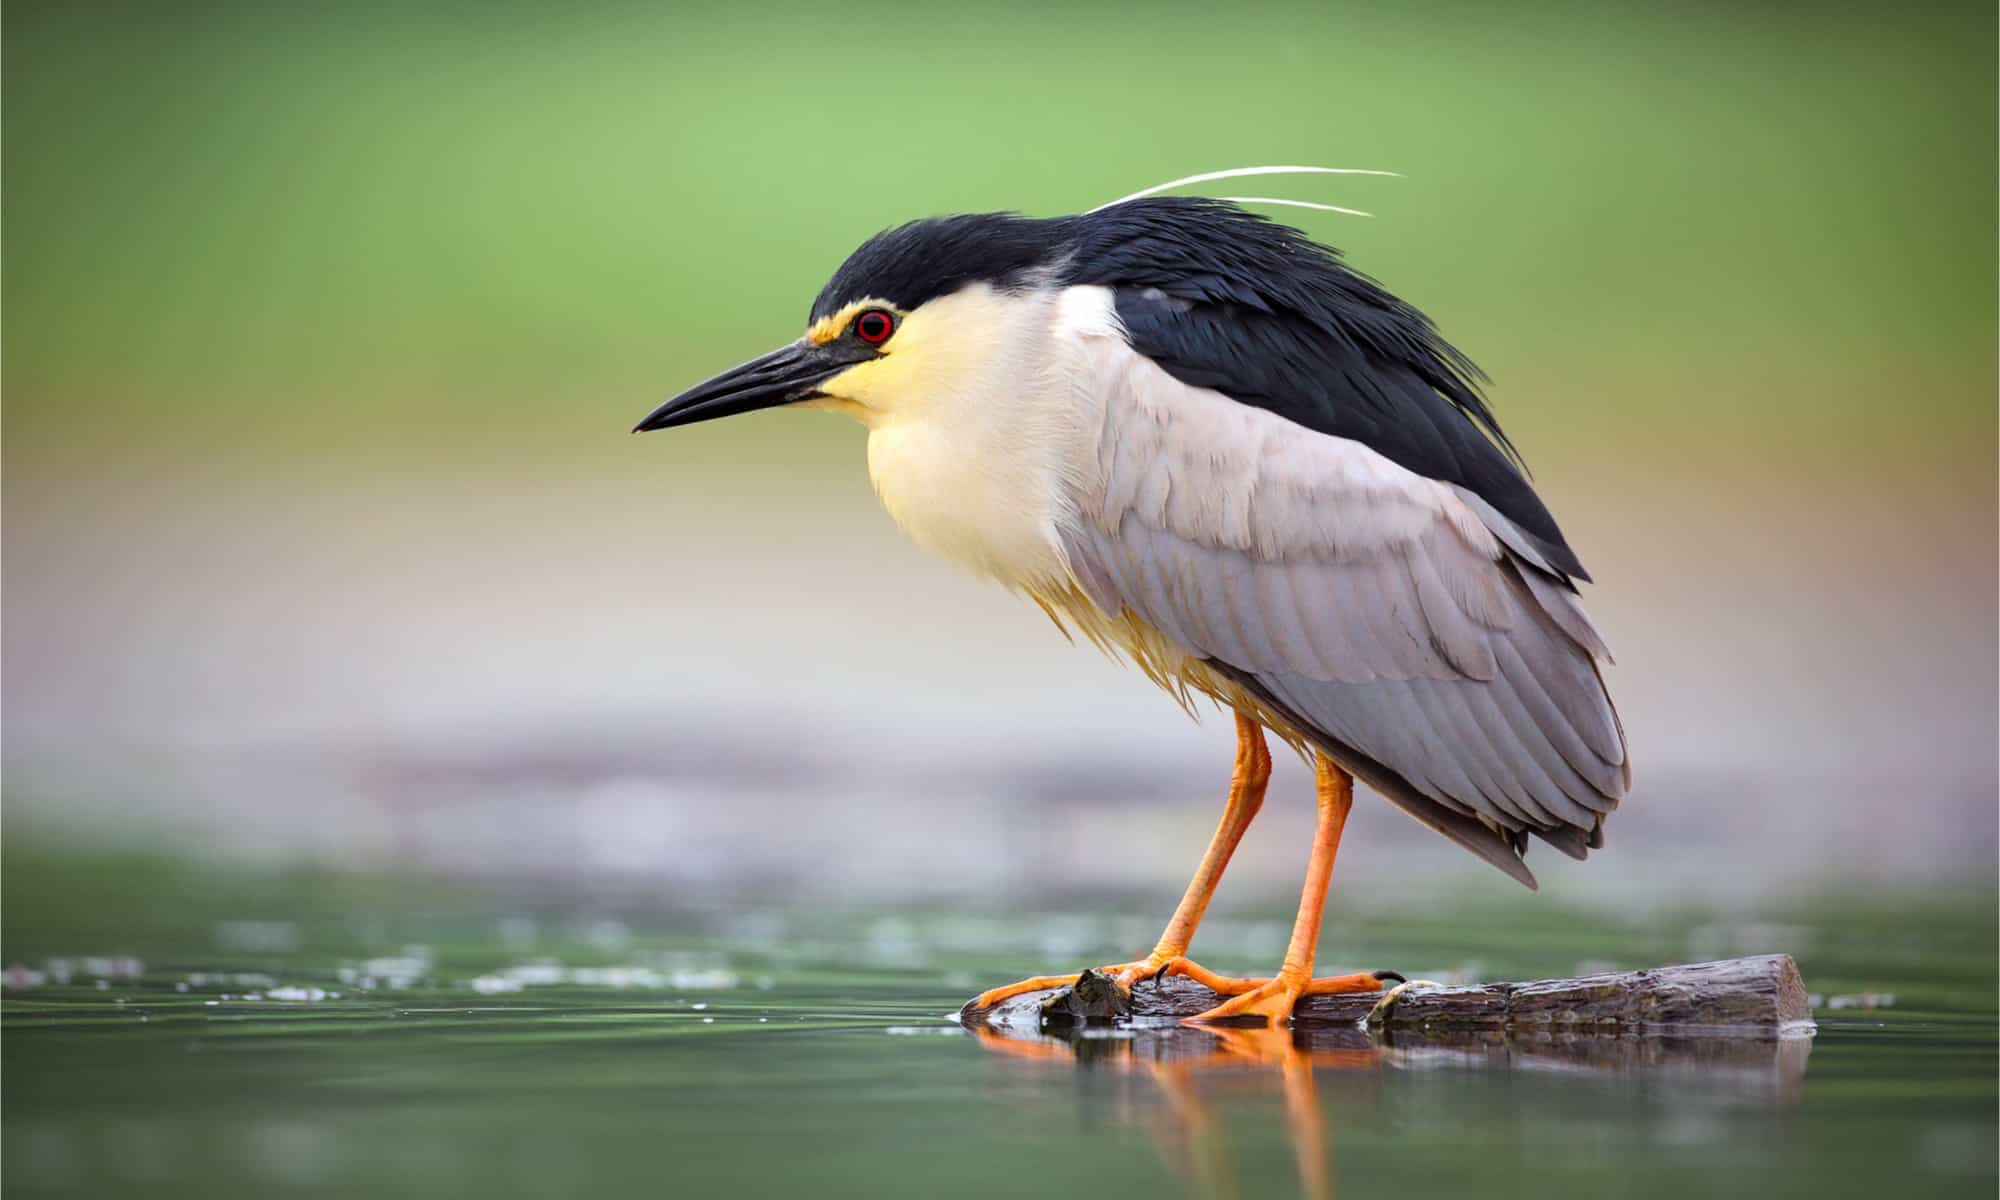 A night heron waiting for a fish to swim by